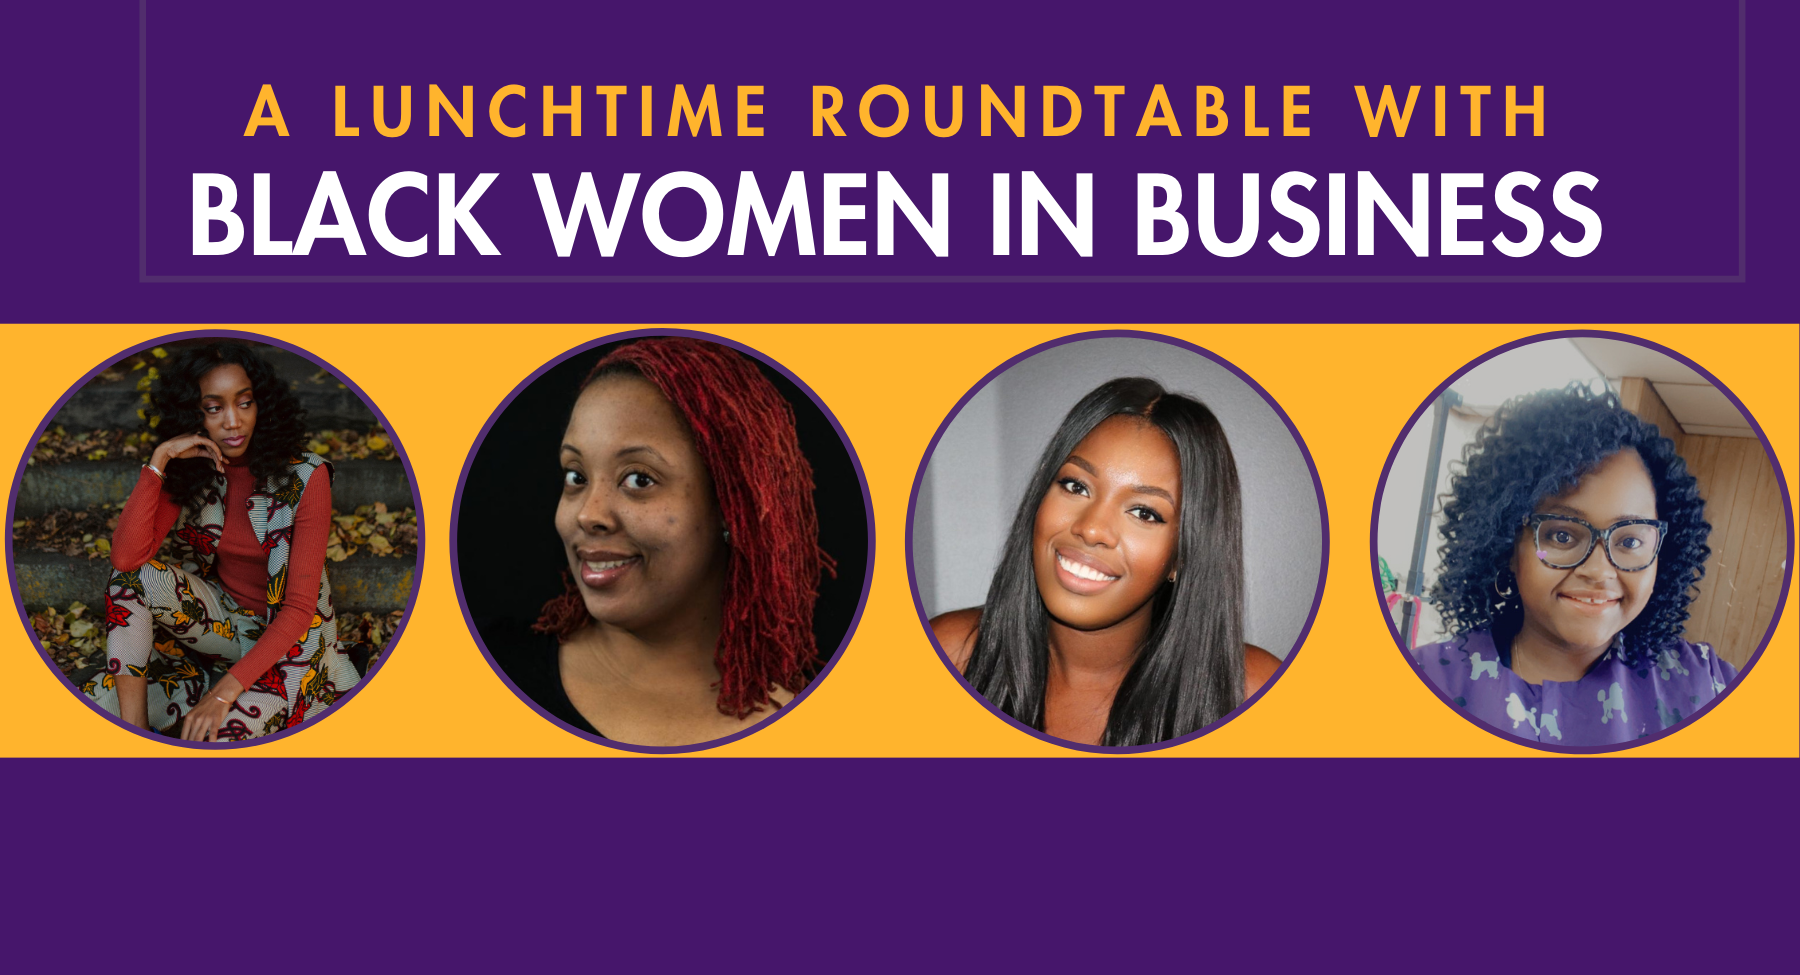 University to Host Lunchtime Roundtable with Black Women in Business Impact Banner